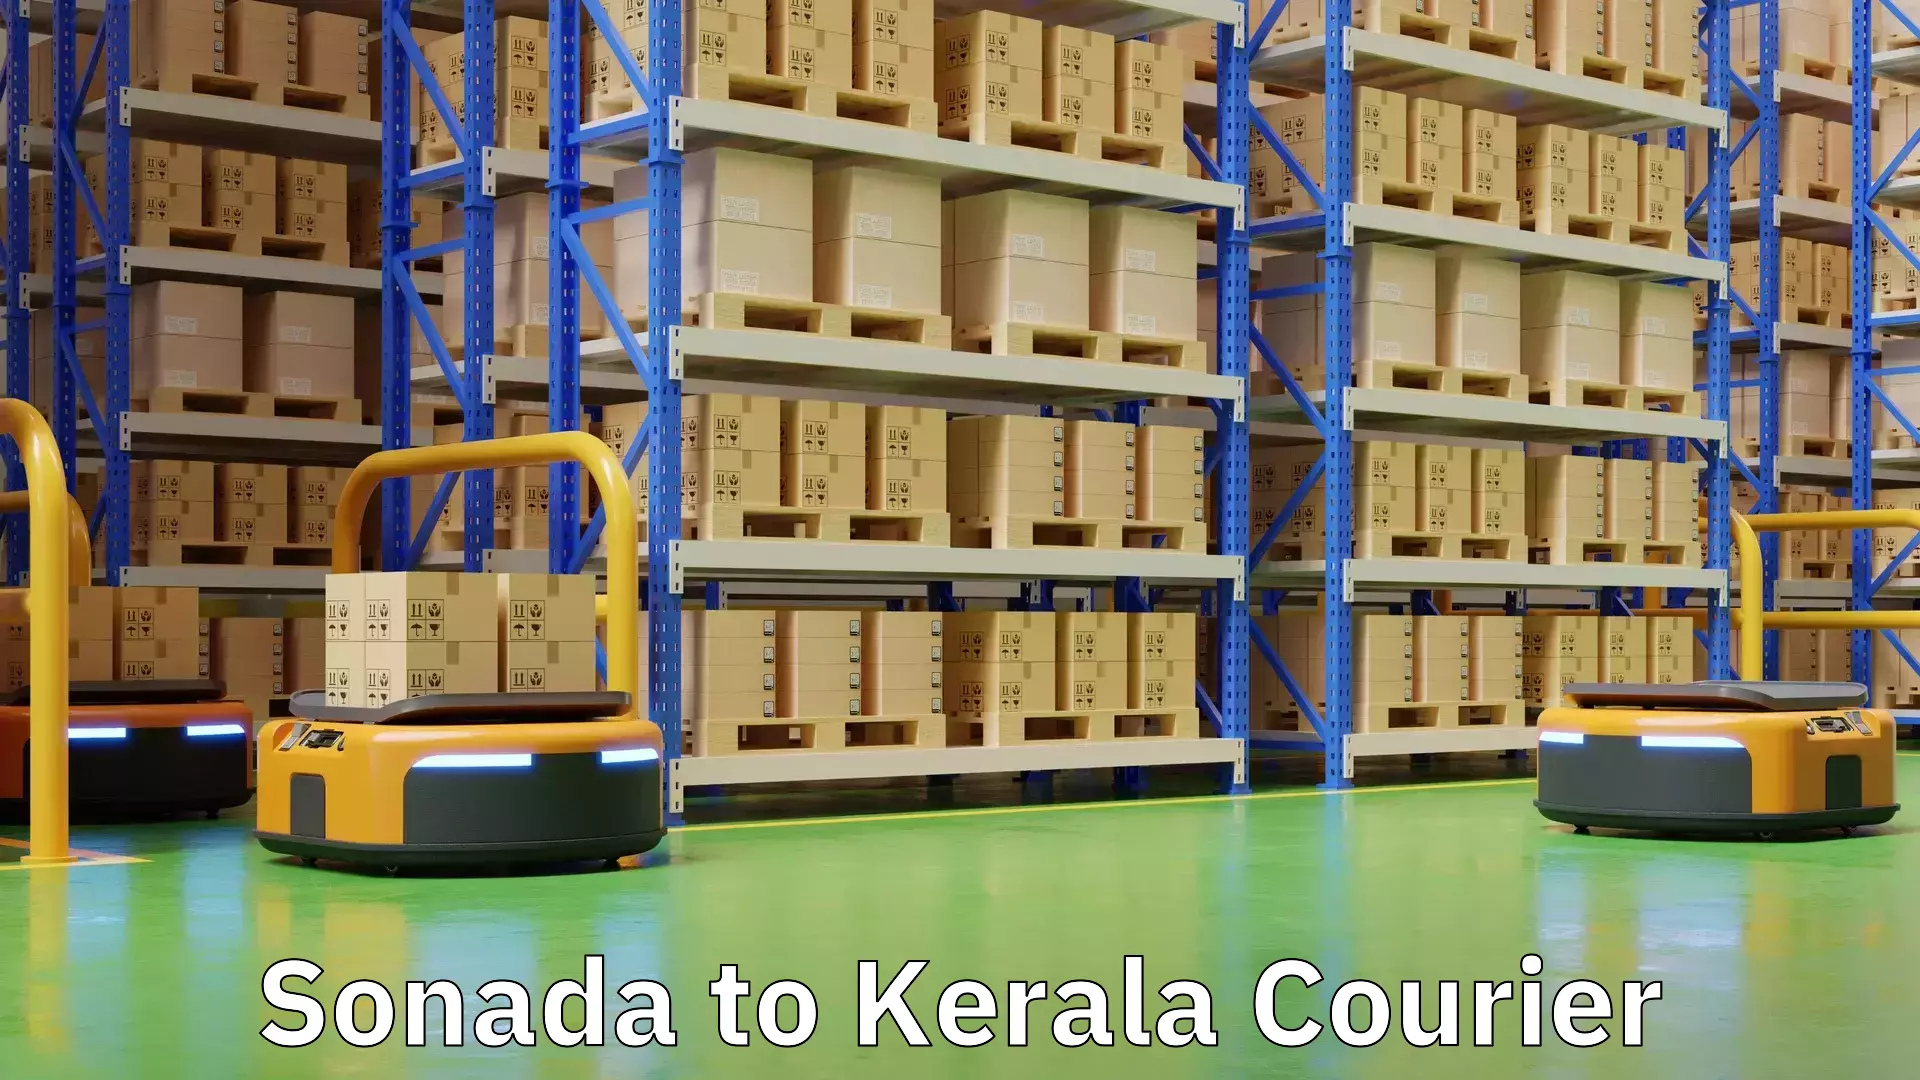 Sustainable shipping practices Sonada to Kerala